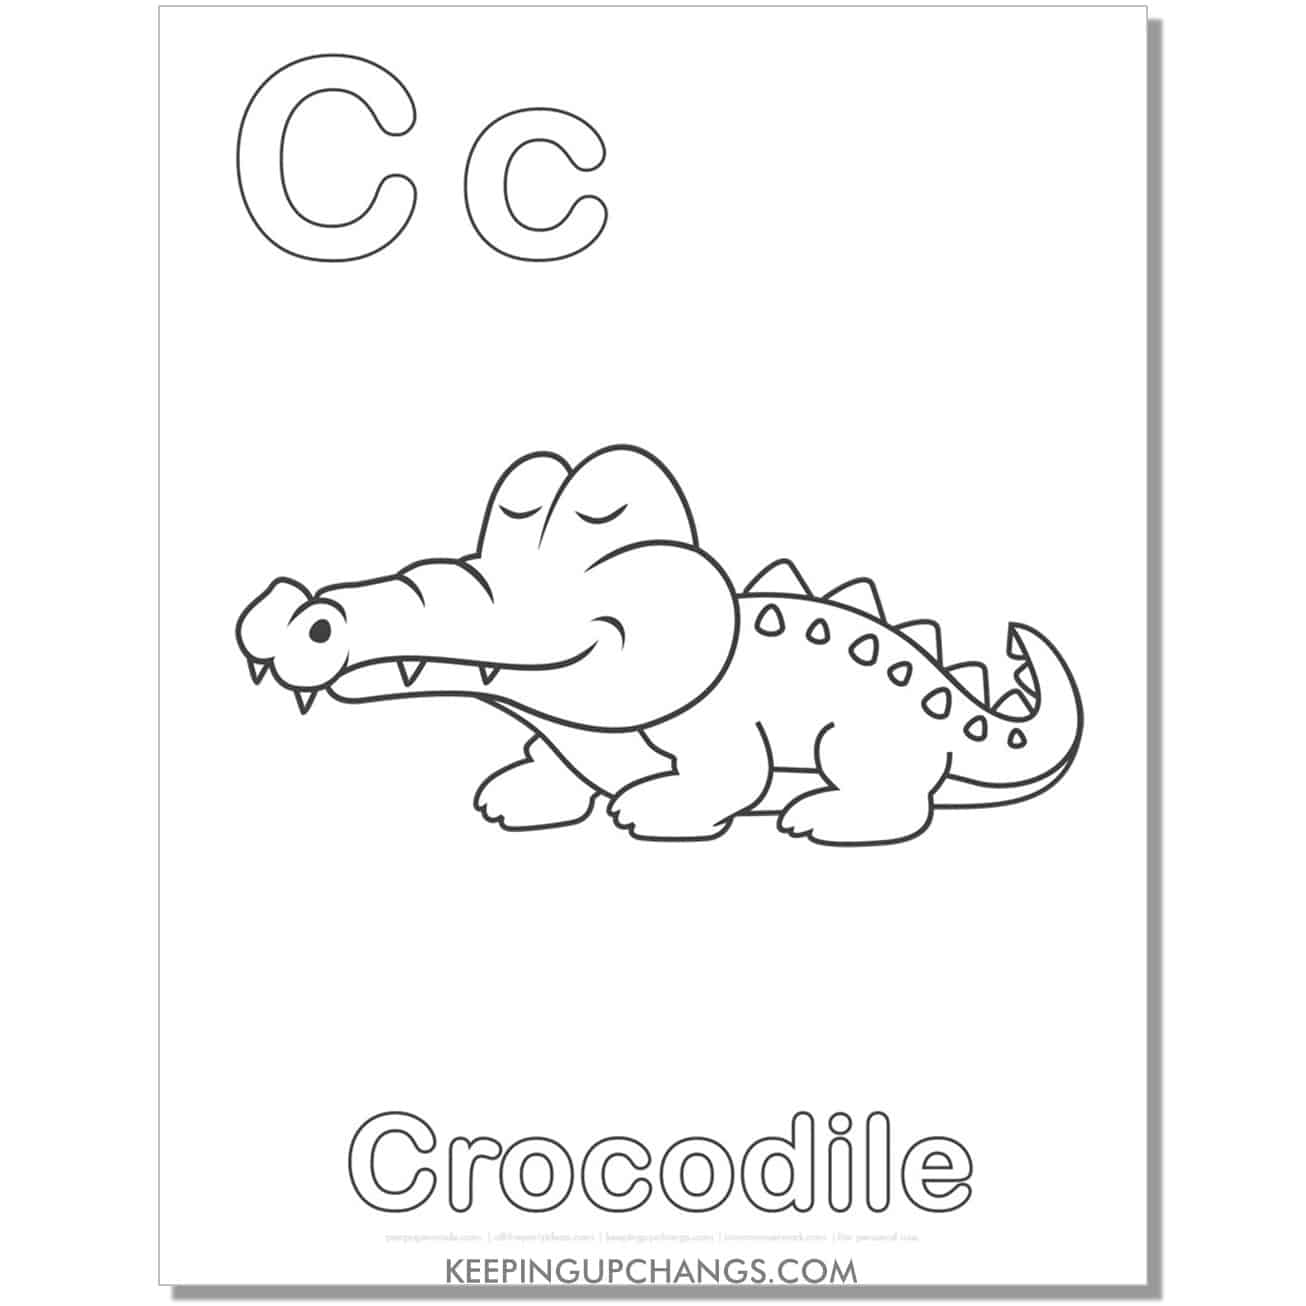 abc coloring sheet, c for crocodile.